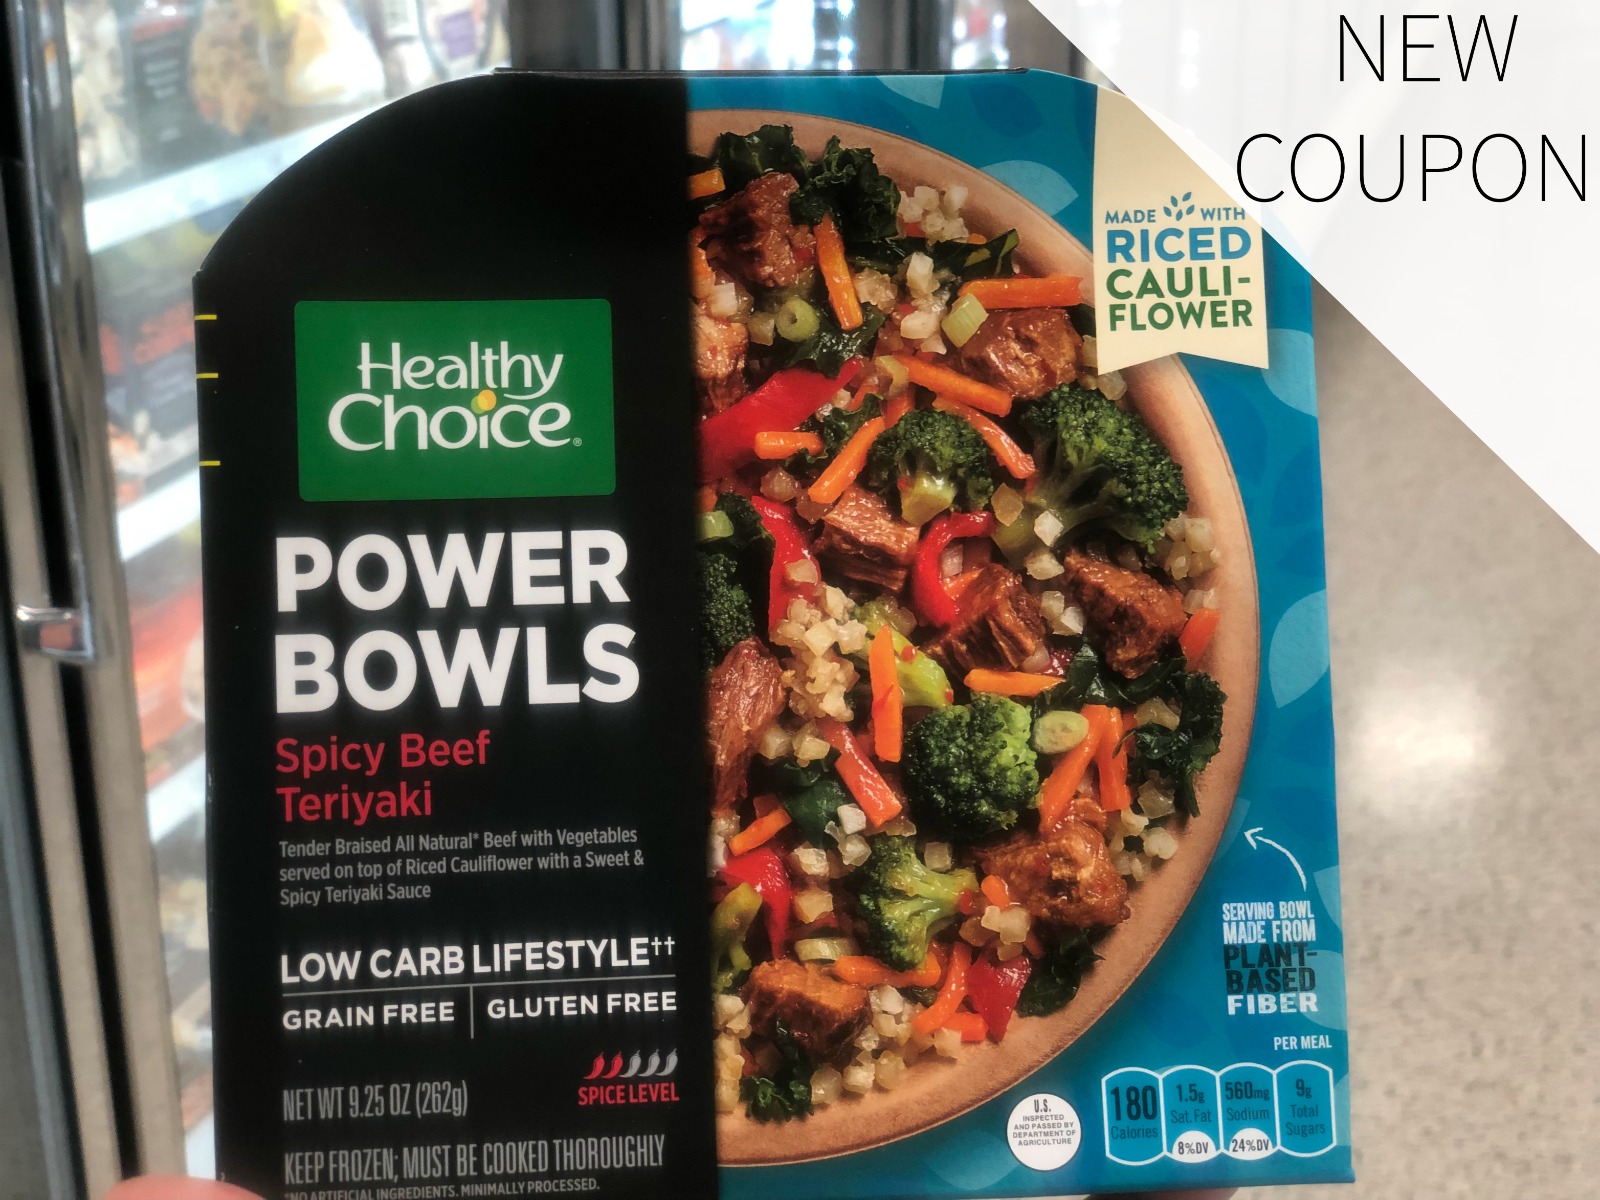 New Coupon - Save On Healthy Choice Power Bowls At Publix on I Heart Publix